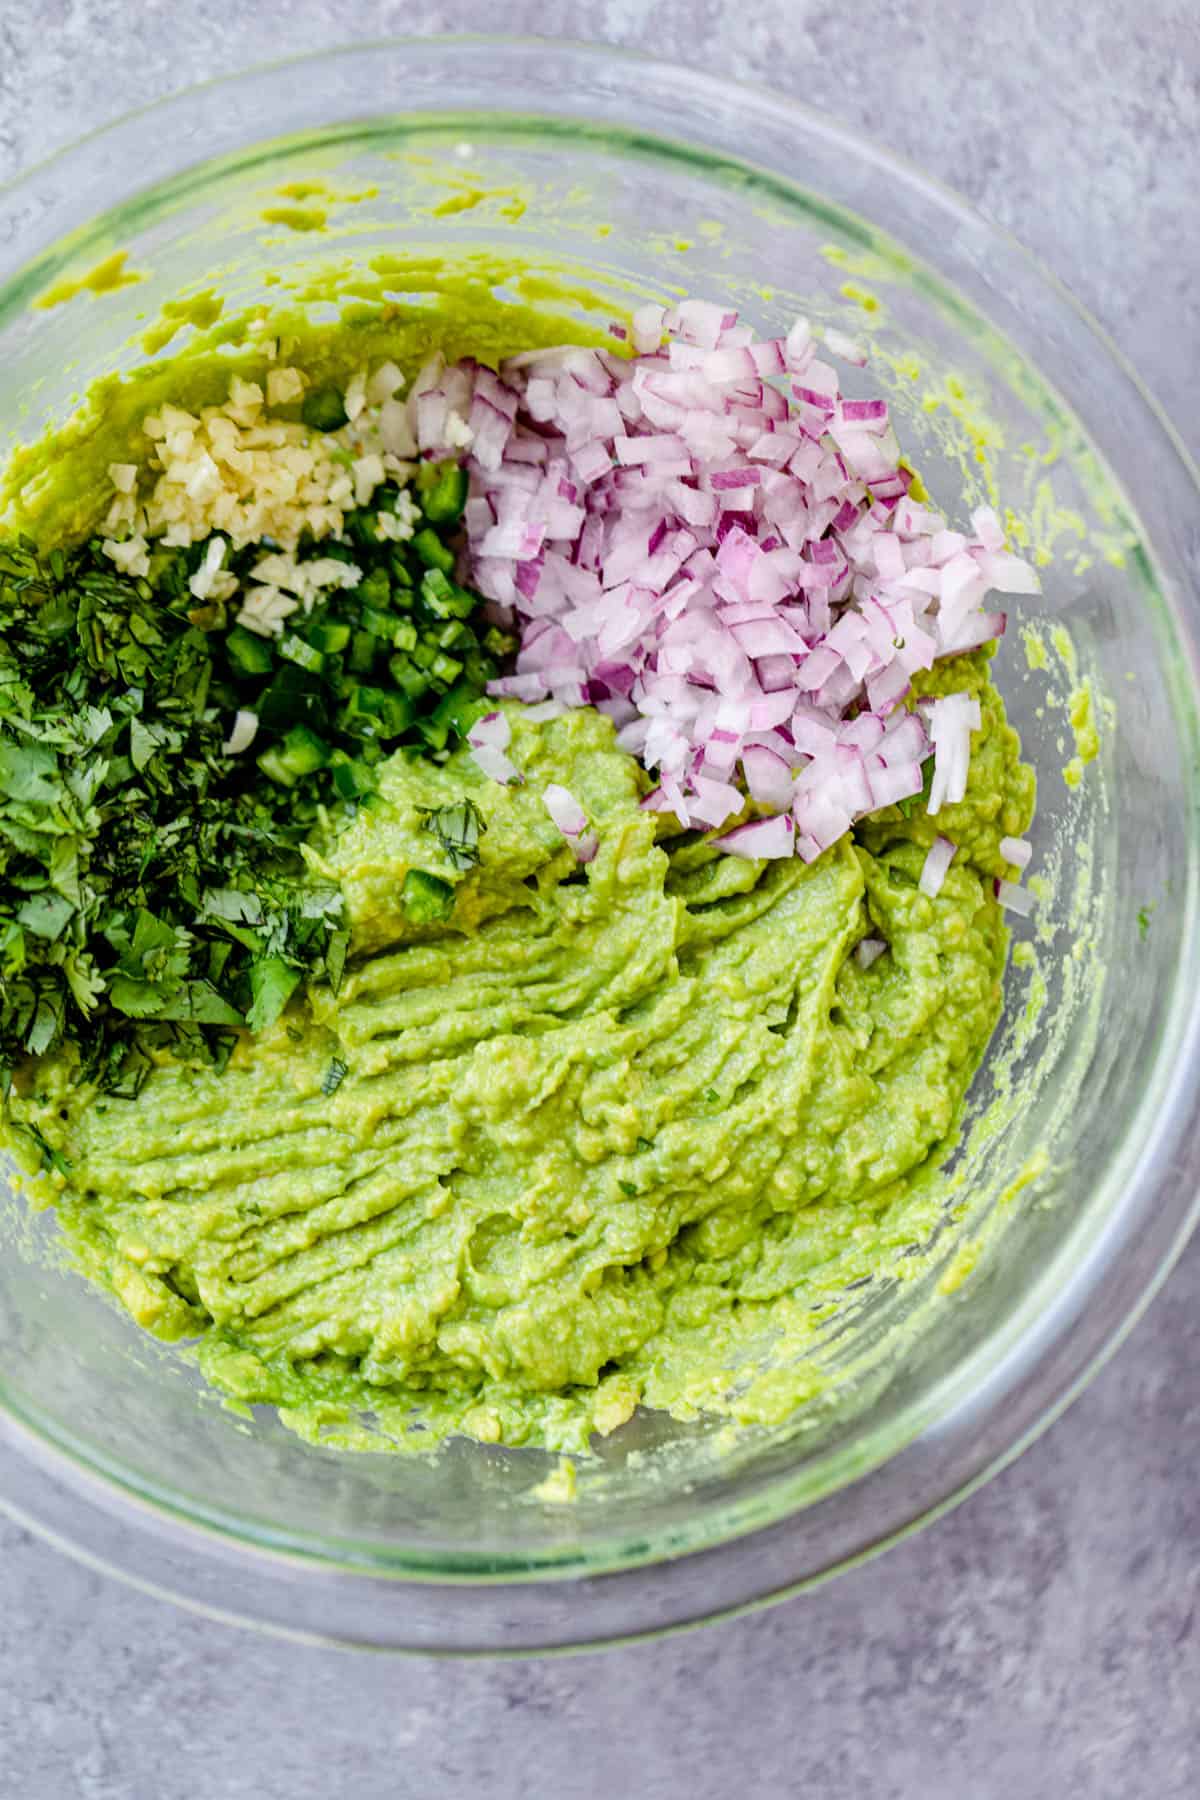 Big clear bowl with mashed avocados. On top of the mashed avocados are chopped red onions, chopped cilantro and chopped jalapeno